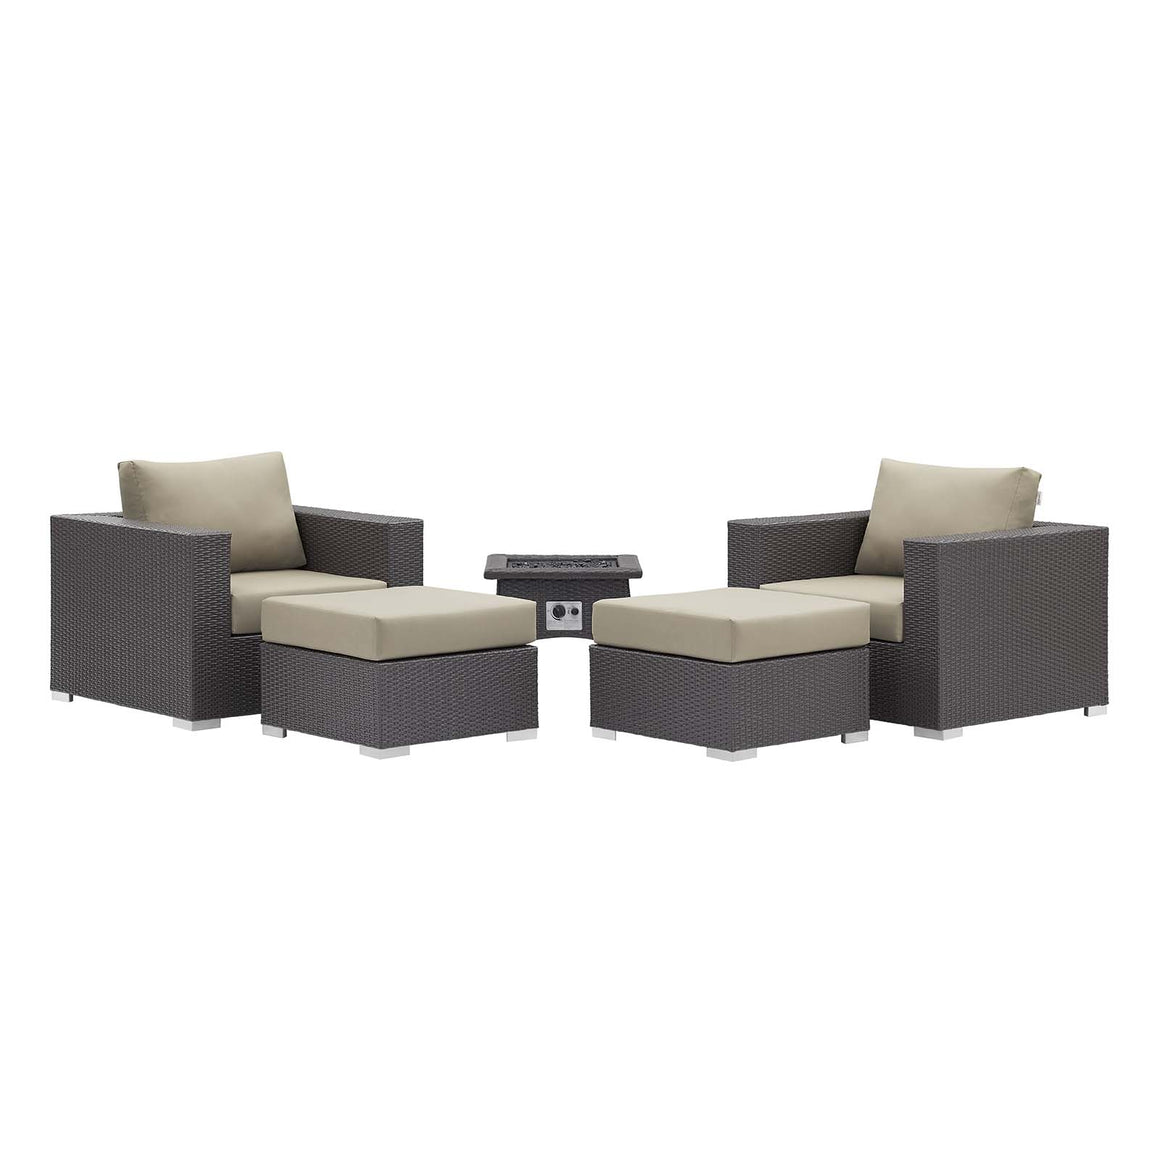 Convene  5 Piece Set Outdoor Patio with Fire Pit